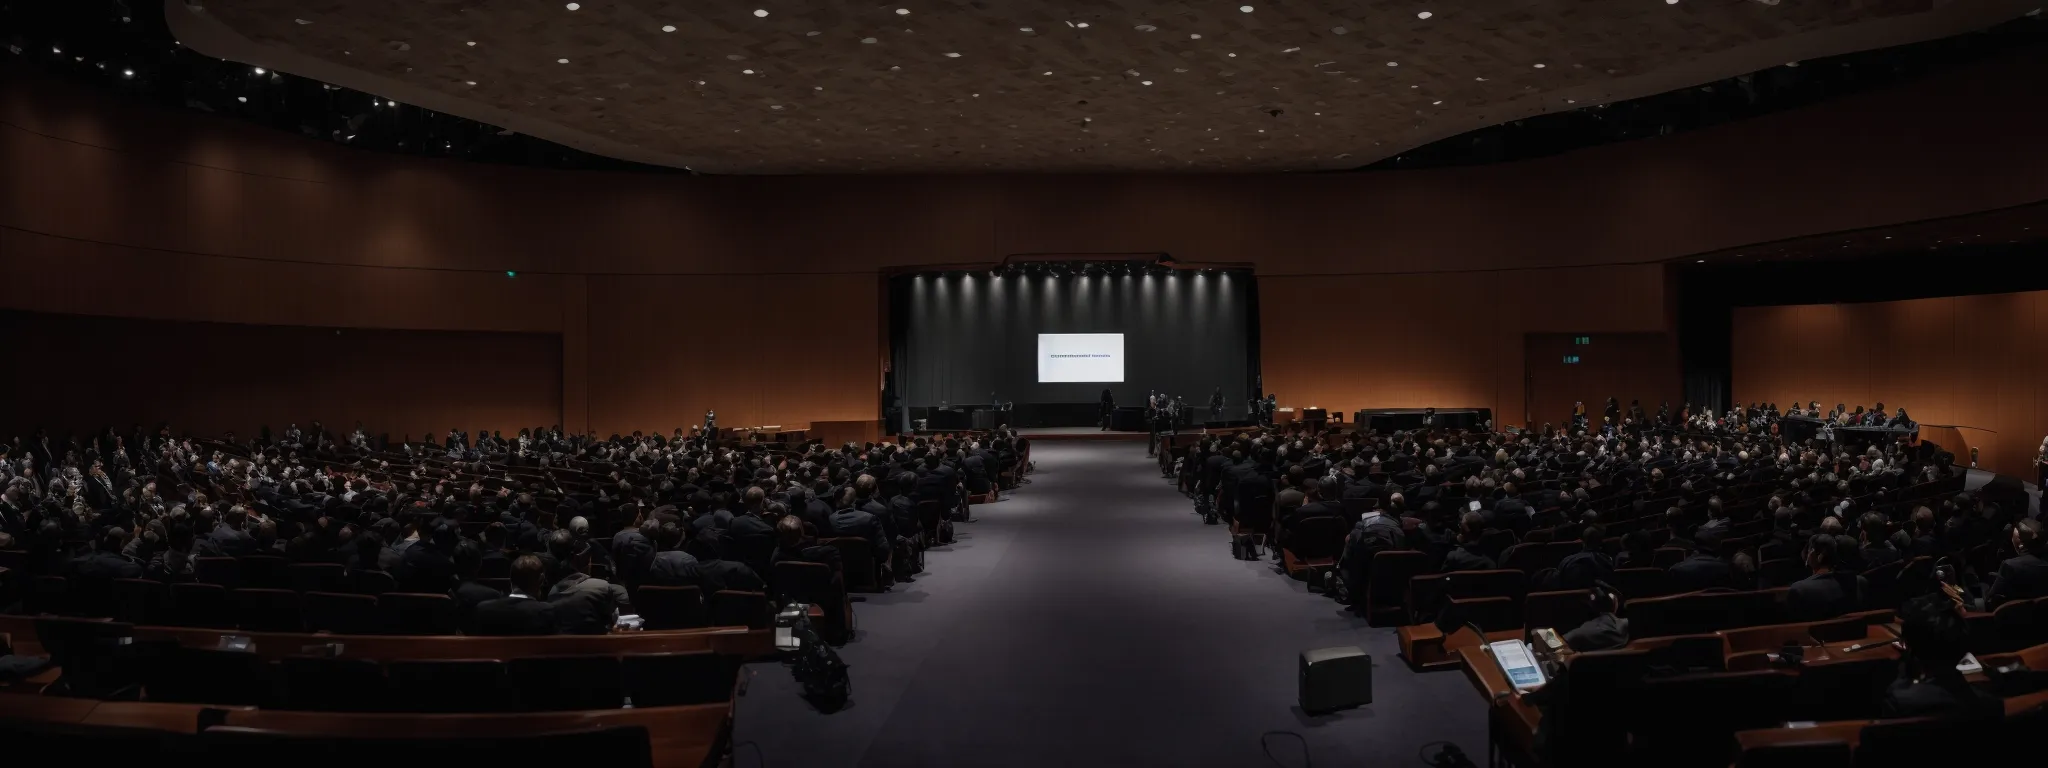 a researcher stands before an attentive audience in a large conference hall, presenting findings through an engaging visual display.